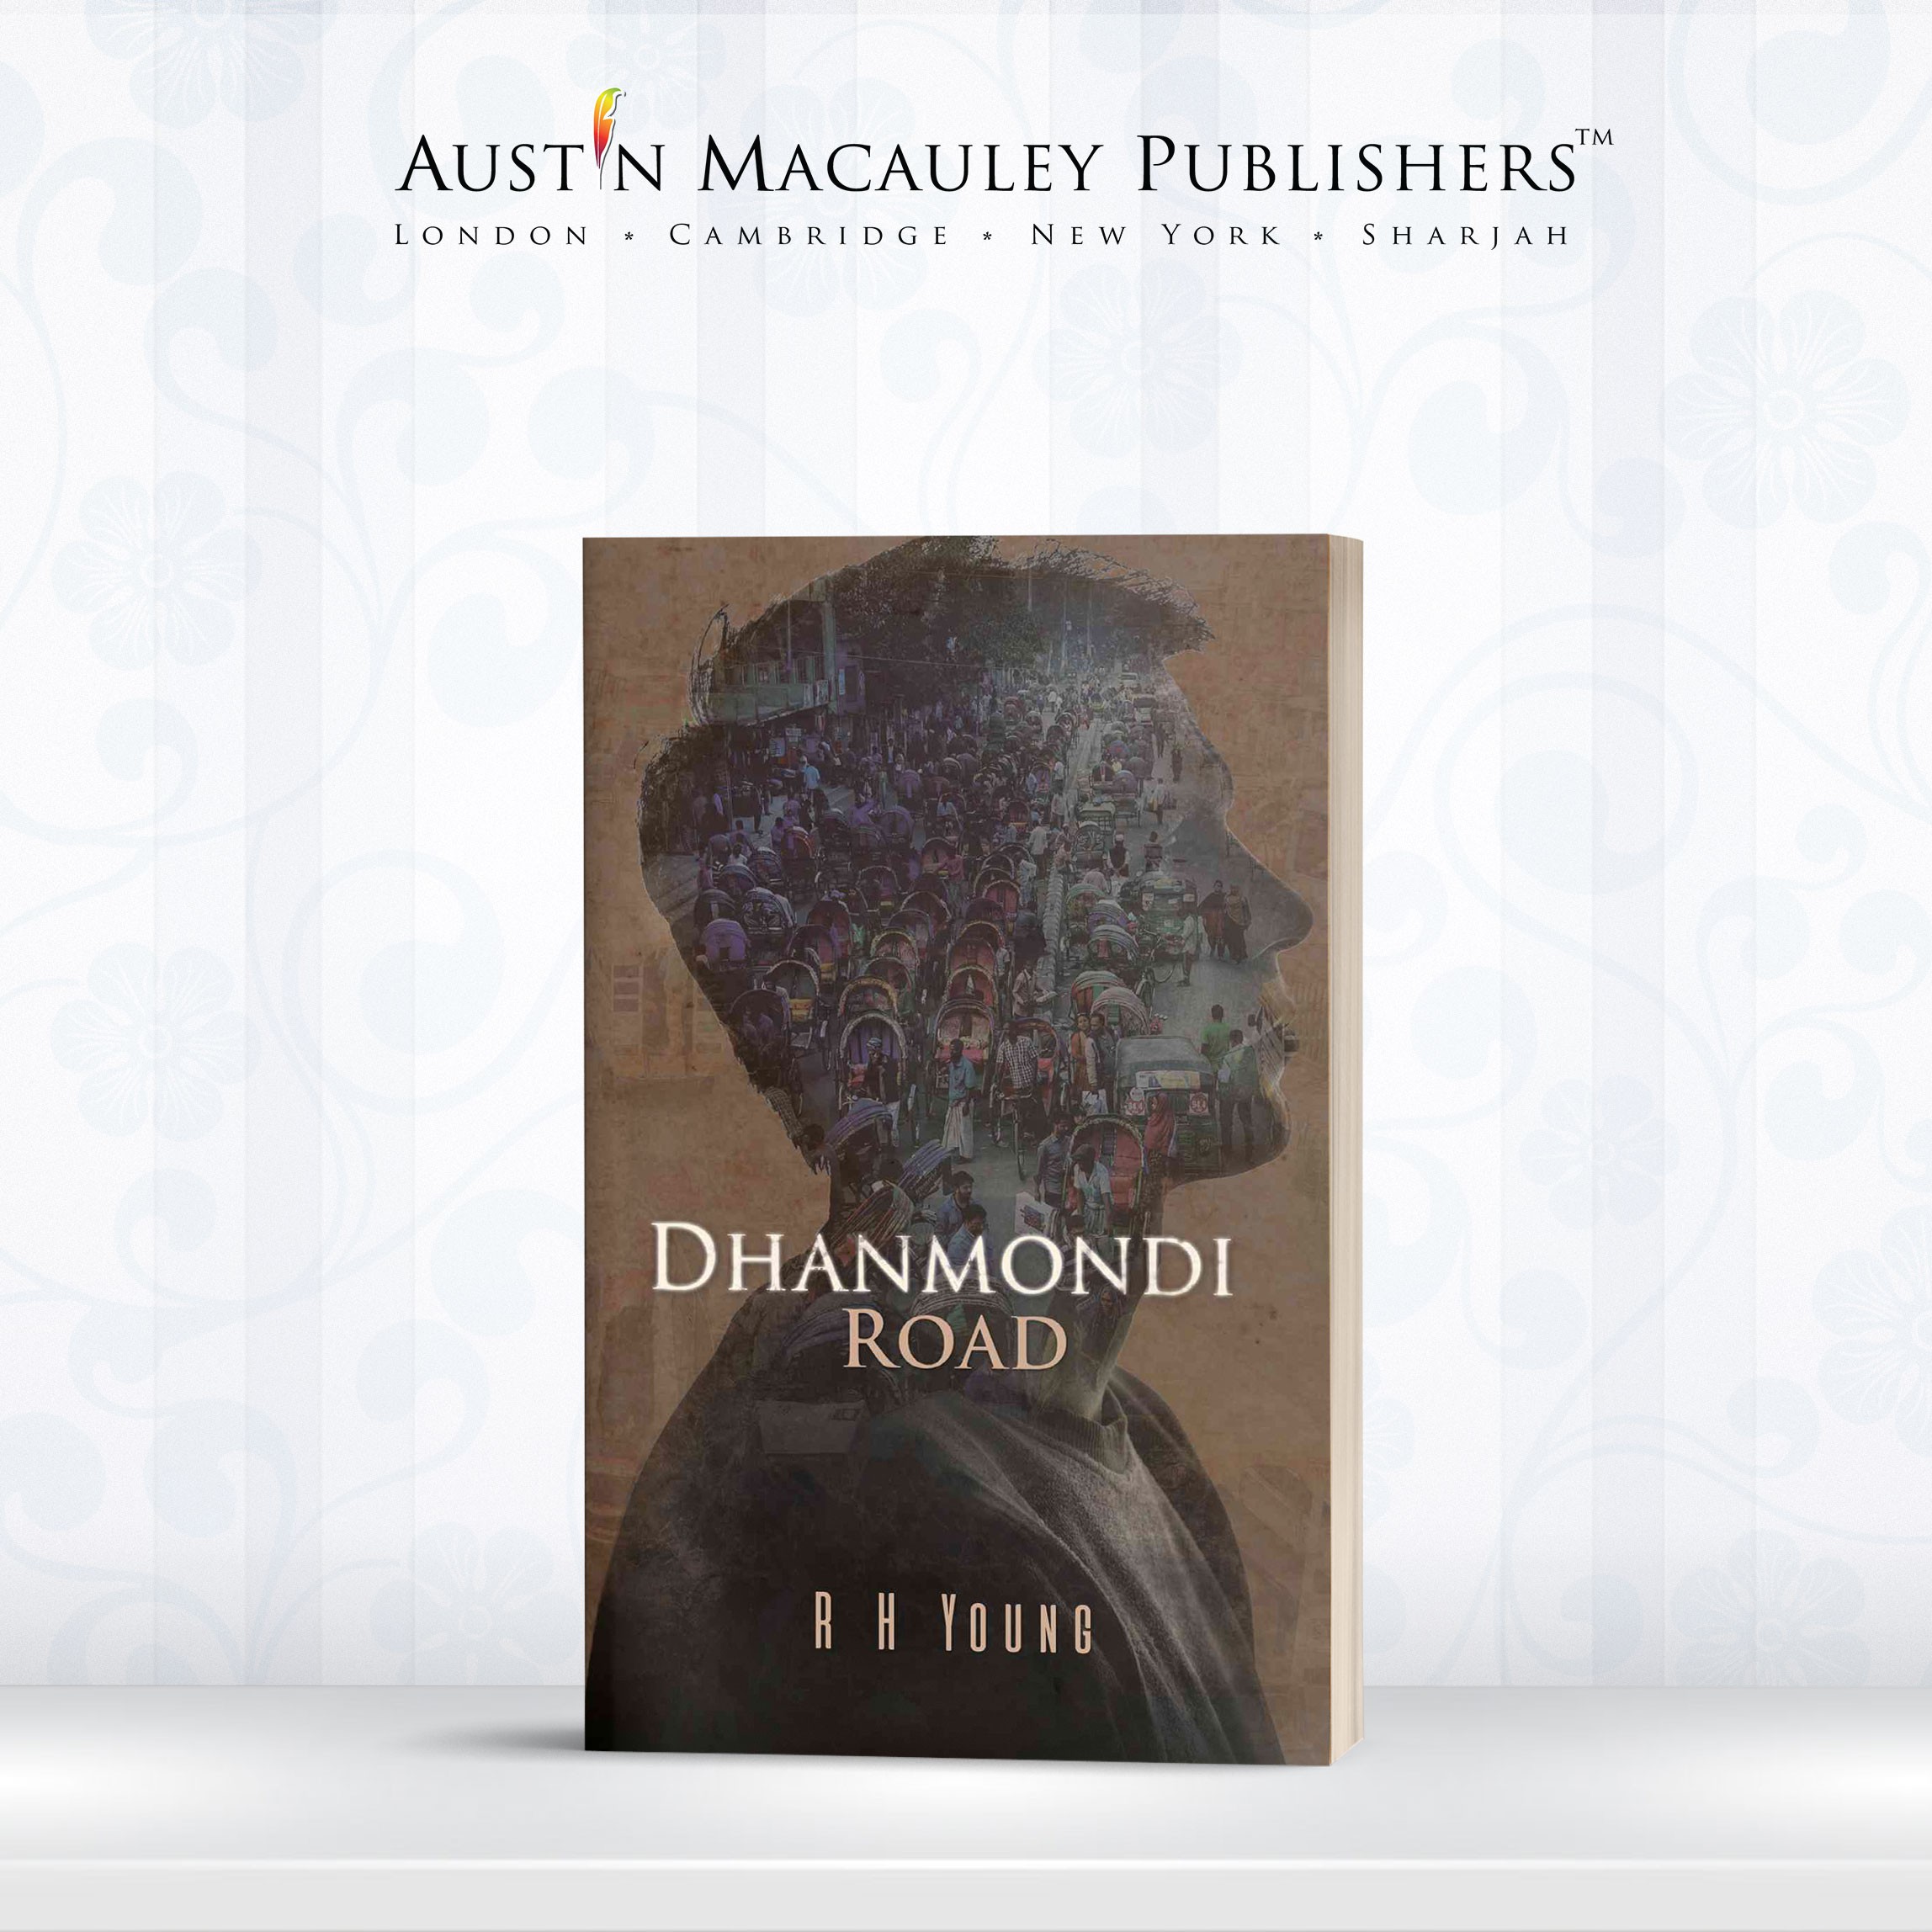 Dhanmondi Road by R H Young Celebrates 2 Years with Austin Macauley Publishers